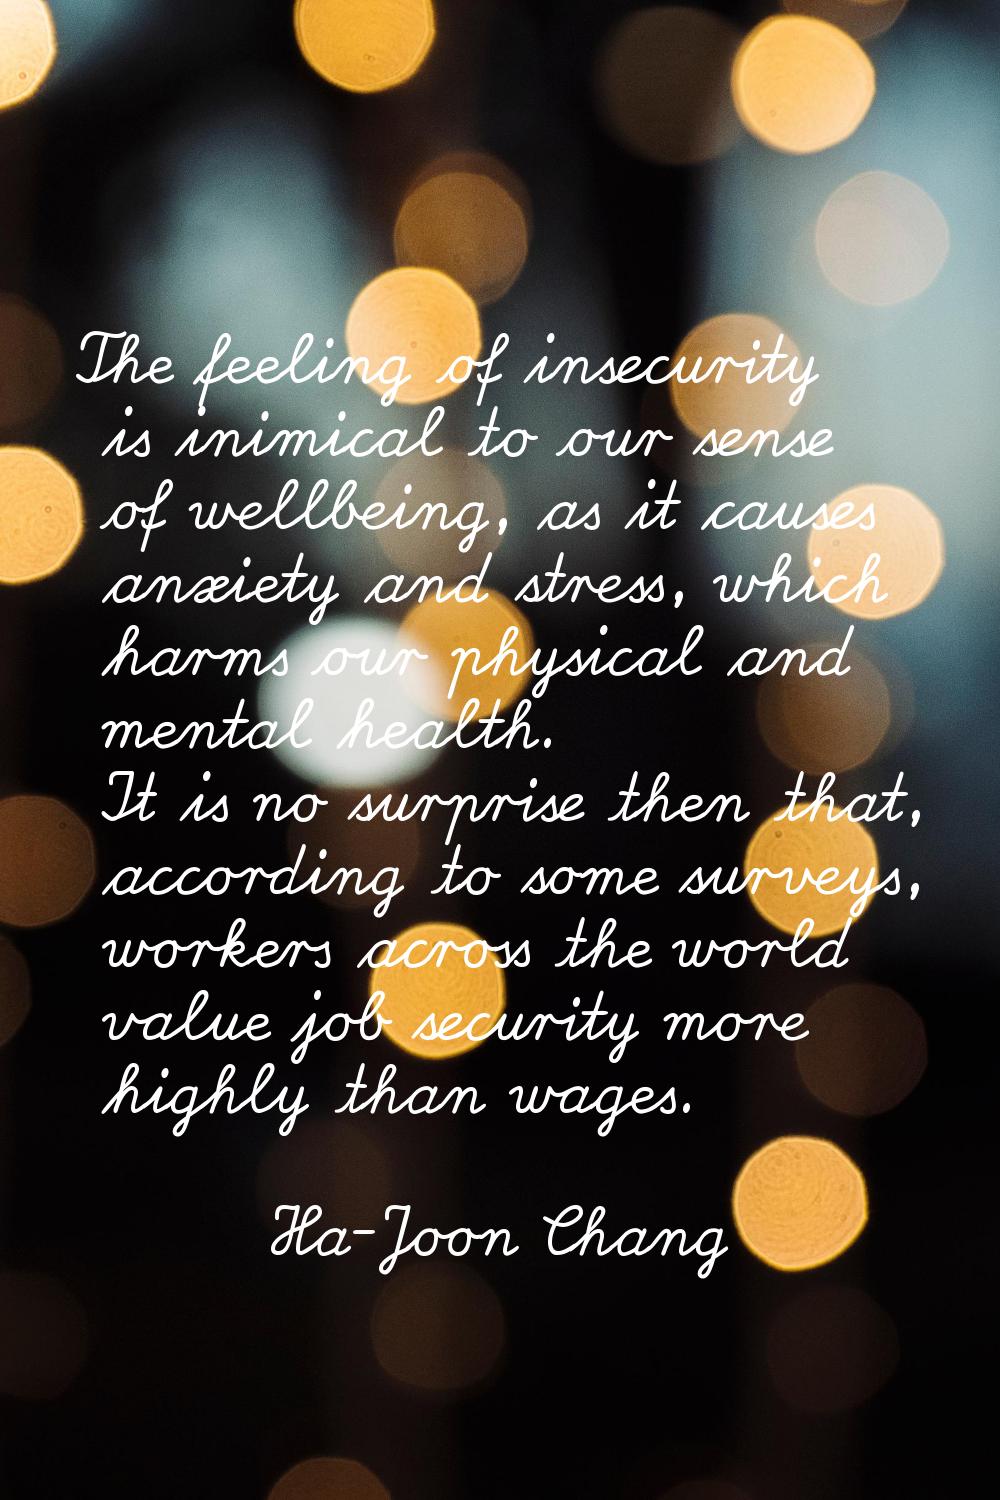 The feeling of insecurity is inimical to our sense of wellbeing, as it causes anxiety and stress, w